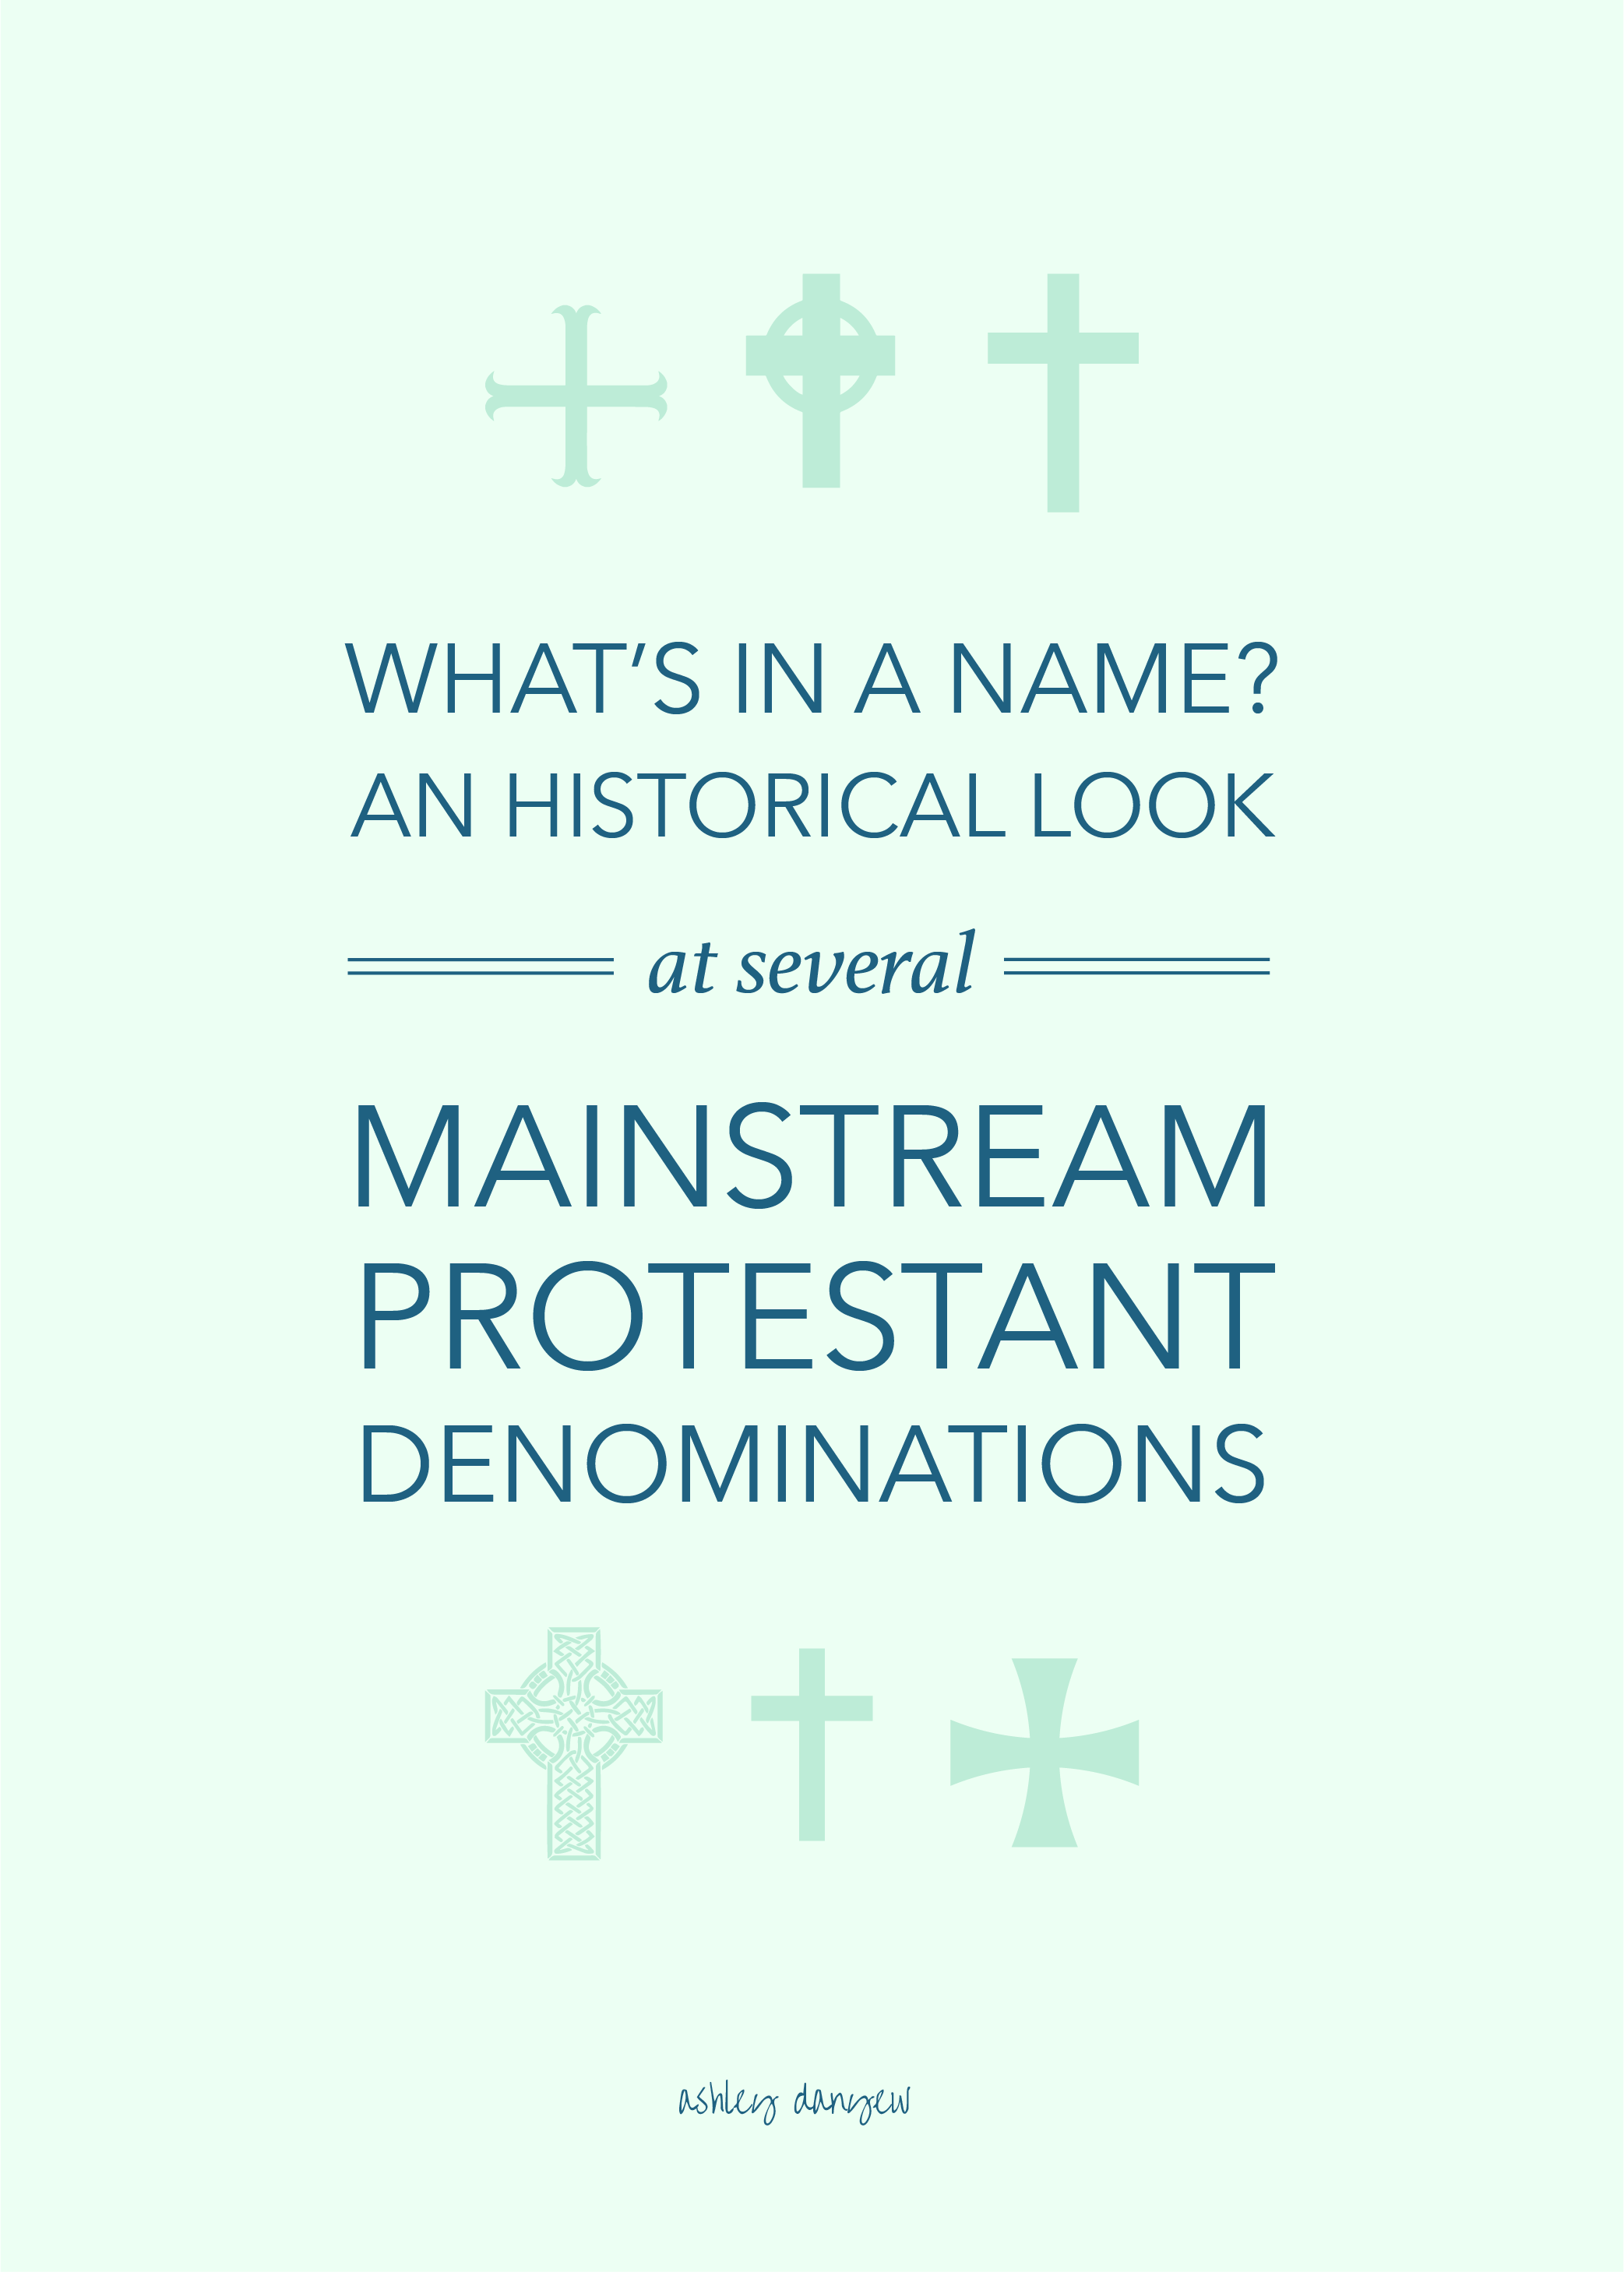 Copy of What's in a Name? An Historical Look at Several Mainstream Protestant Denominations